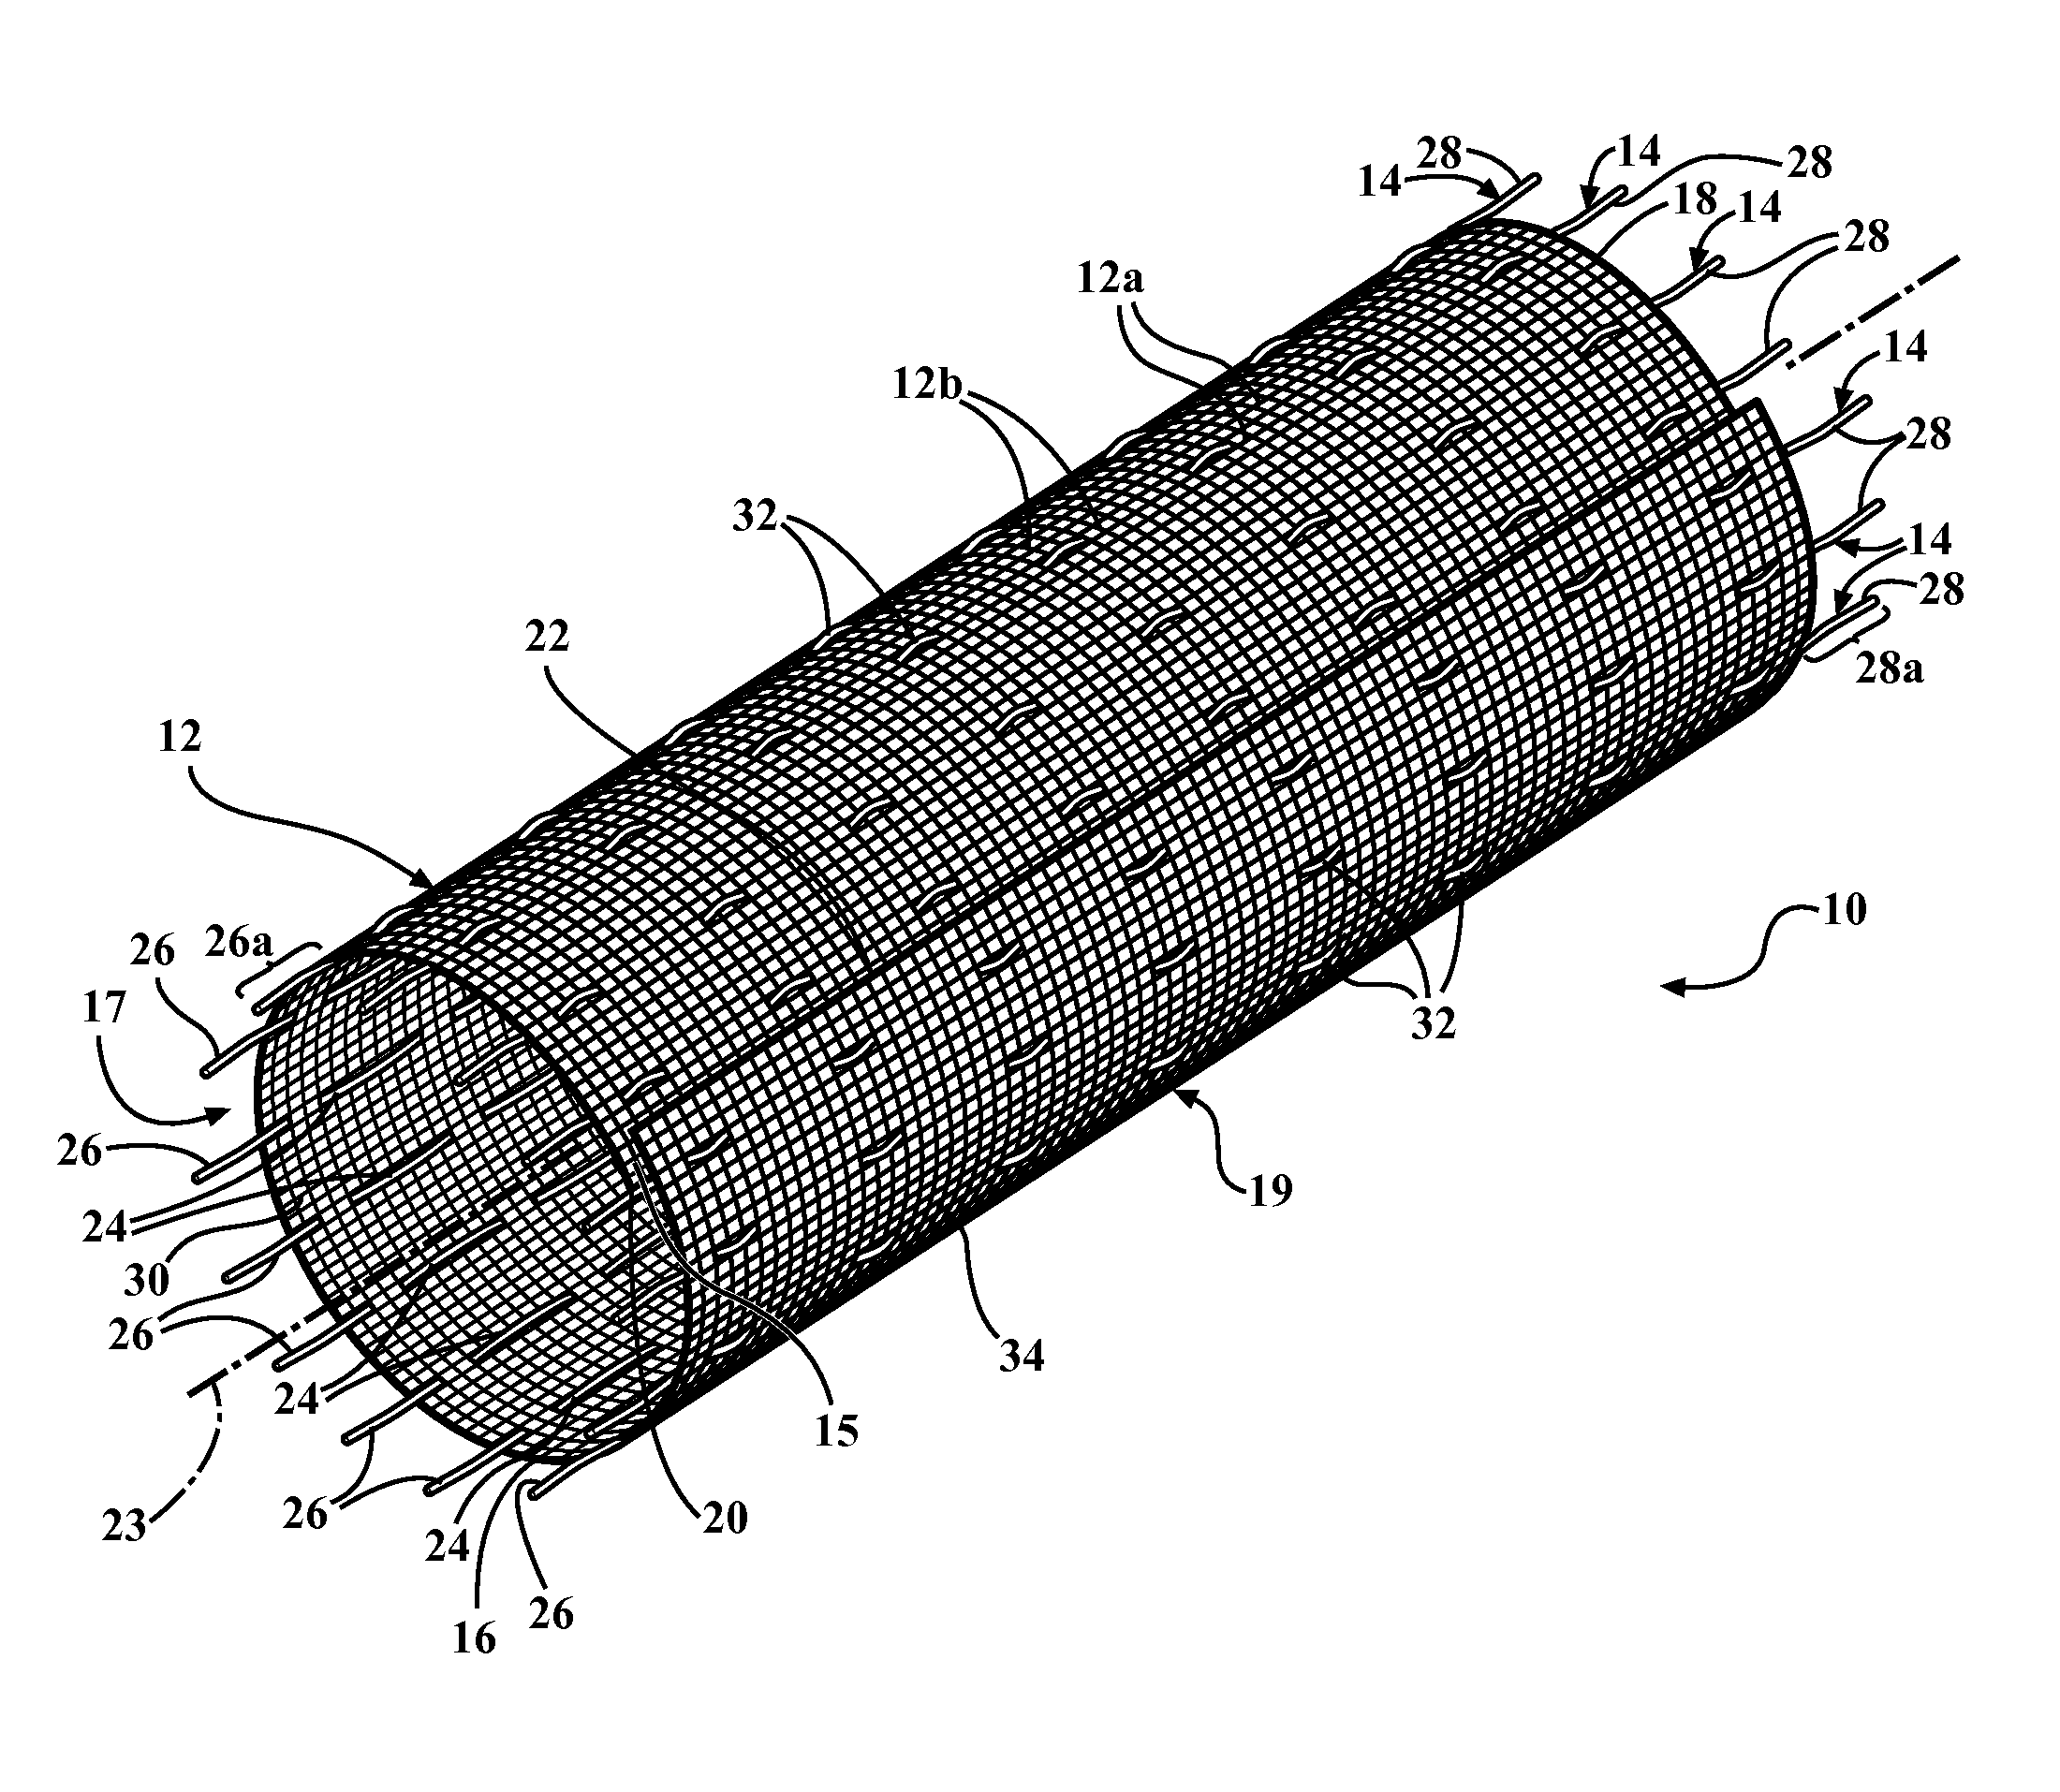 Wrappable textile sleeve with extendable electro-functional yarn leads and method of construction thereof